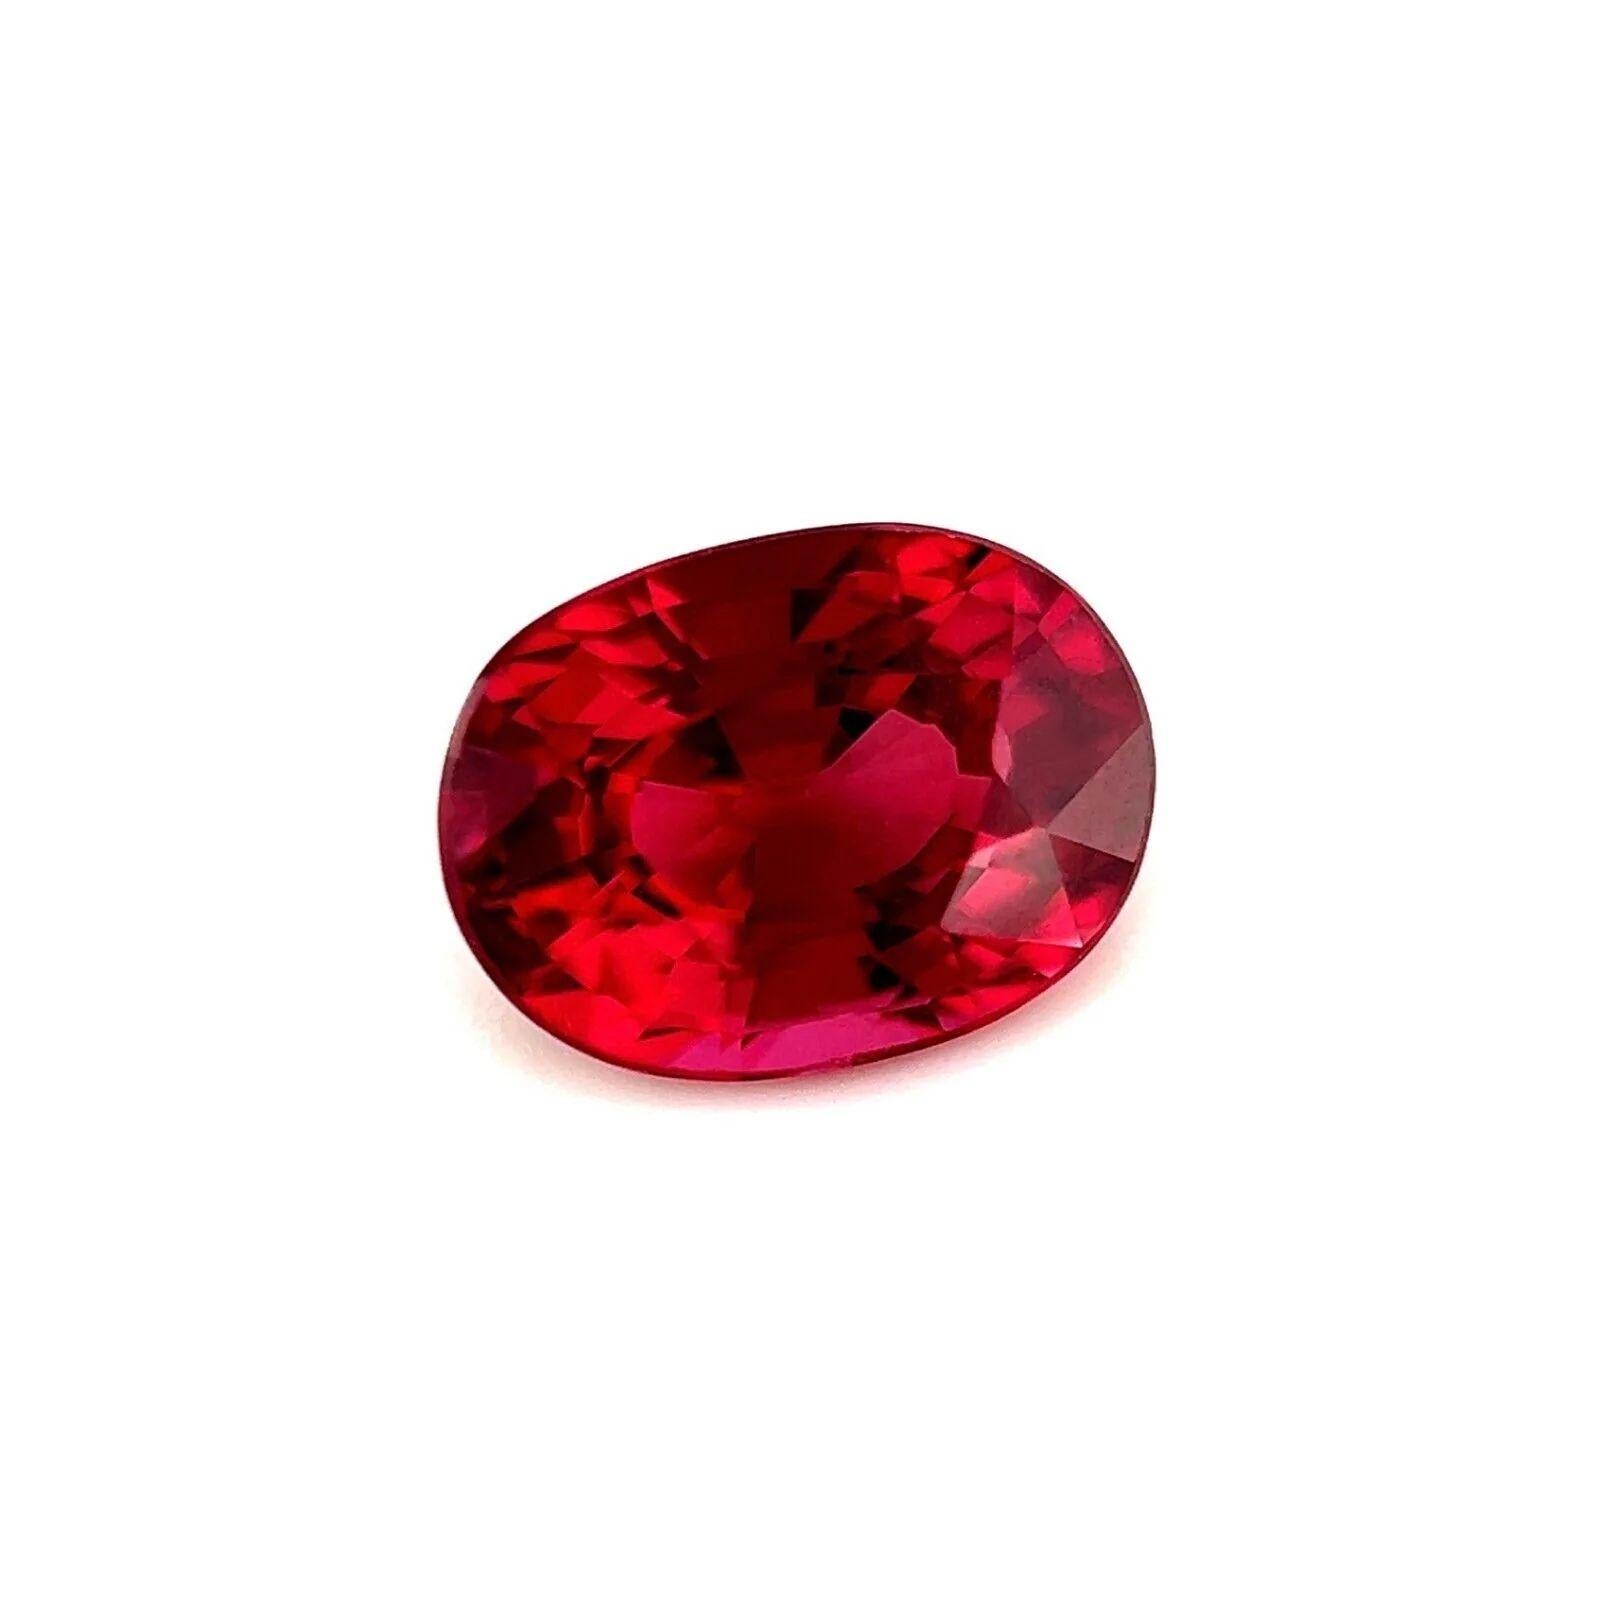 Fine 1.93ct Vivid Pink Purple Rhodolite Garnet Oval Cut Loose Gem IF 8x6.4mm

Fine Loose Rhodolite Garnet Gemstone.
1.93 Carat with a beautiful vivid pink purple colour and excellent clarity, very clean gemstone, IF.
Also has an excellent oval cut